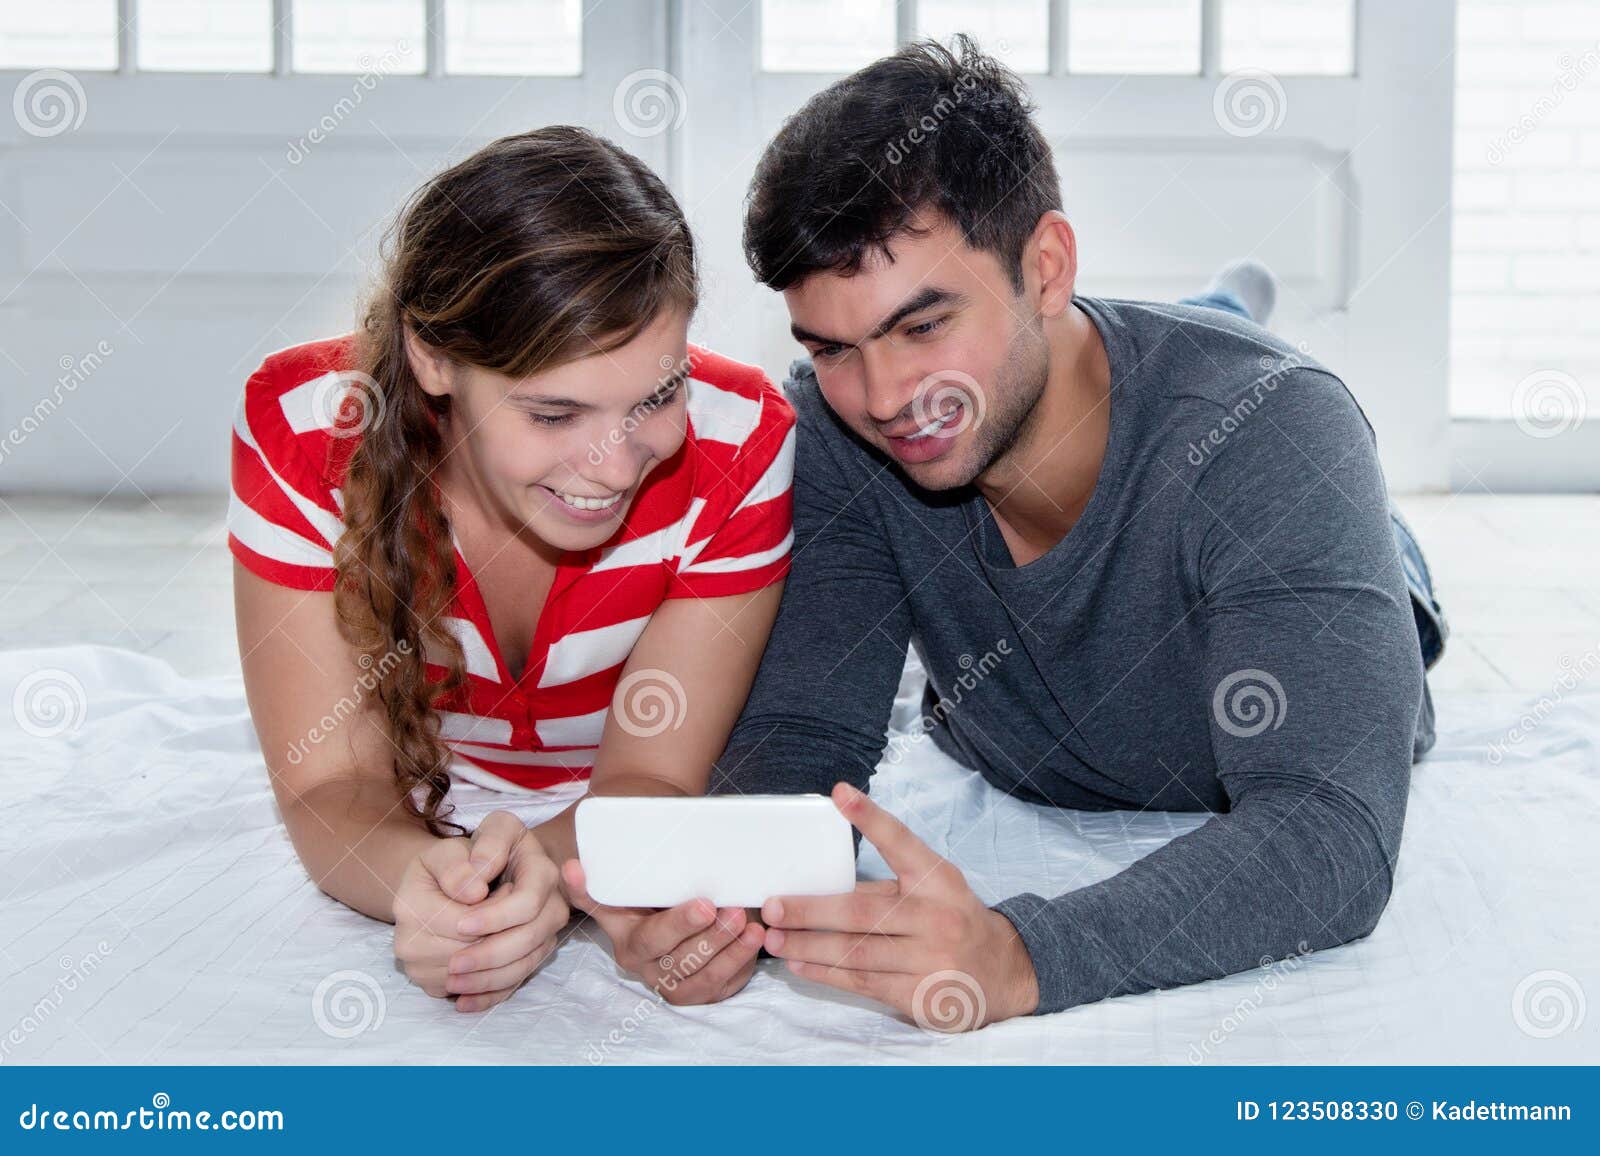 Love Couple Watching Movie On Mobile Phone Stock Photo Image Of Girlfriend Indoors 123508330